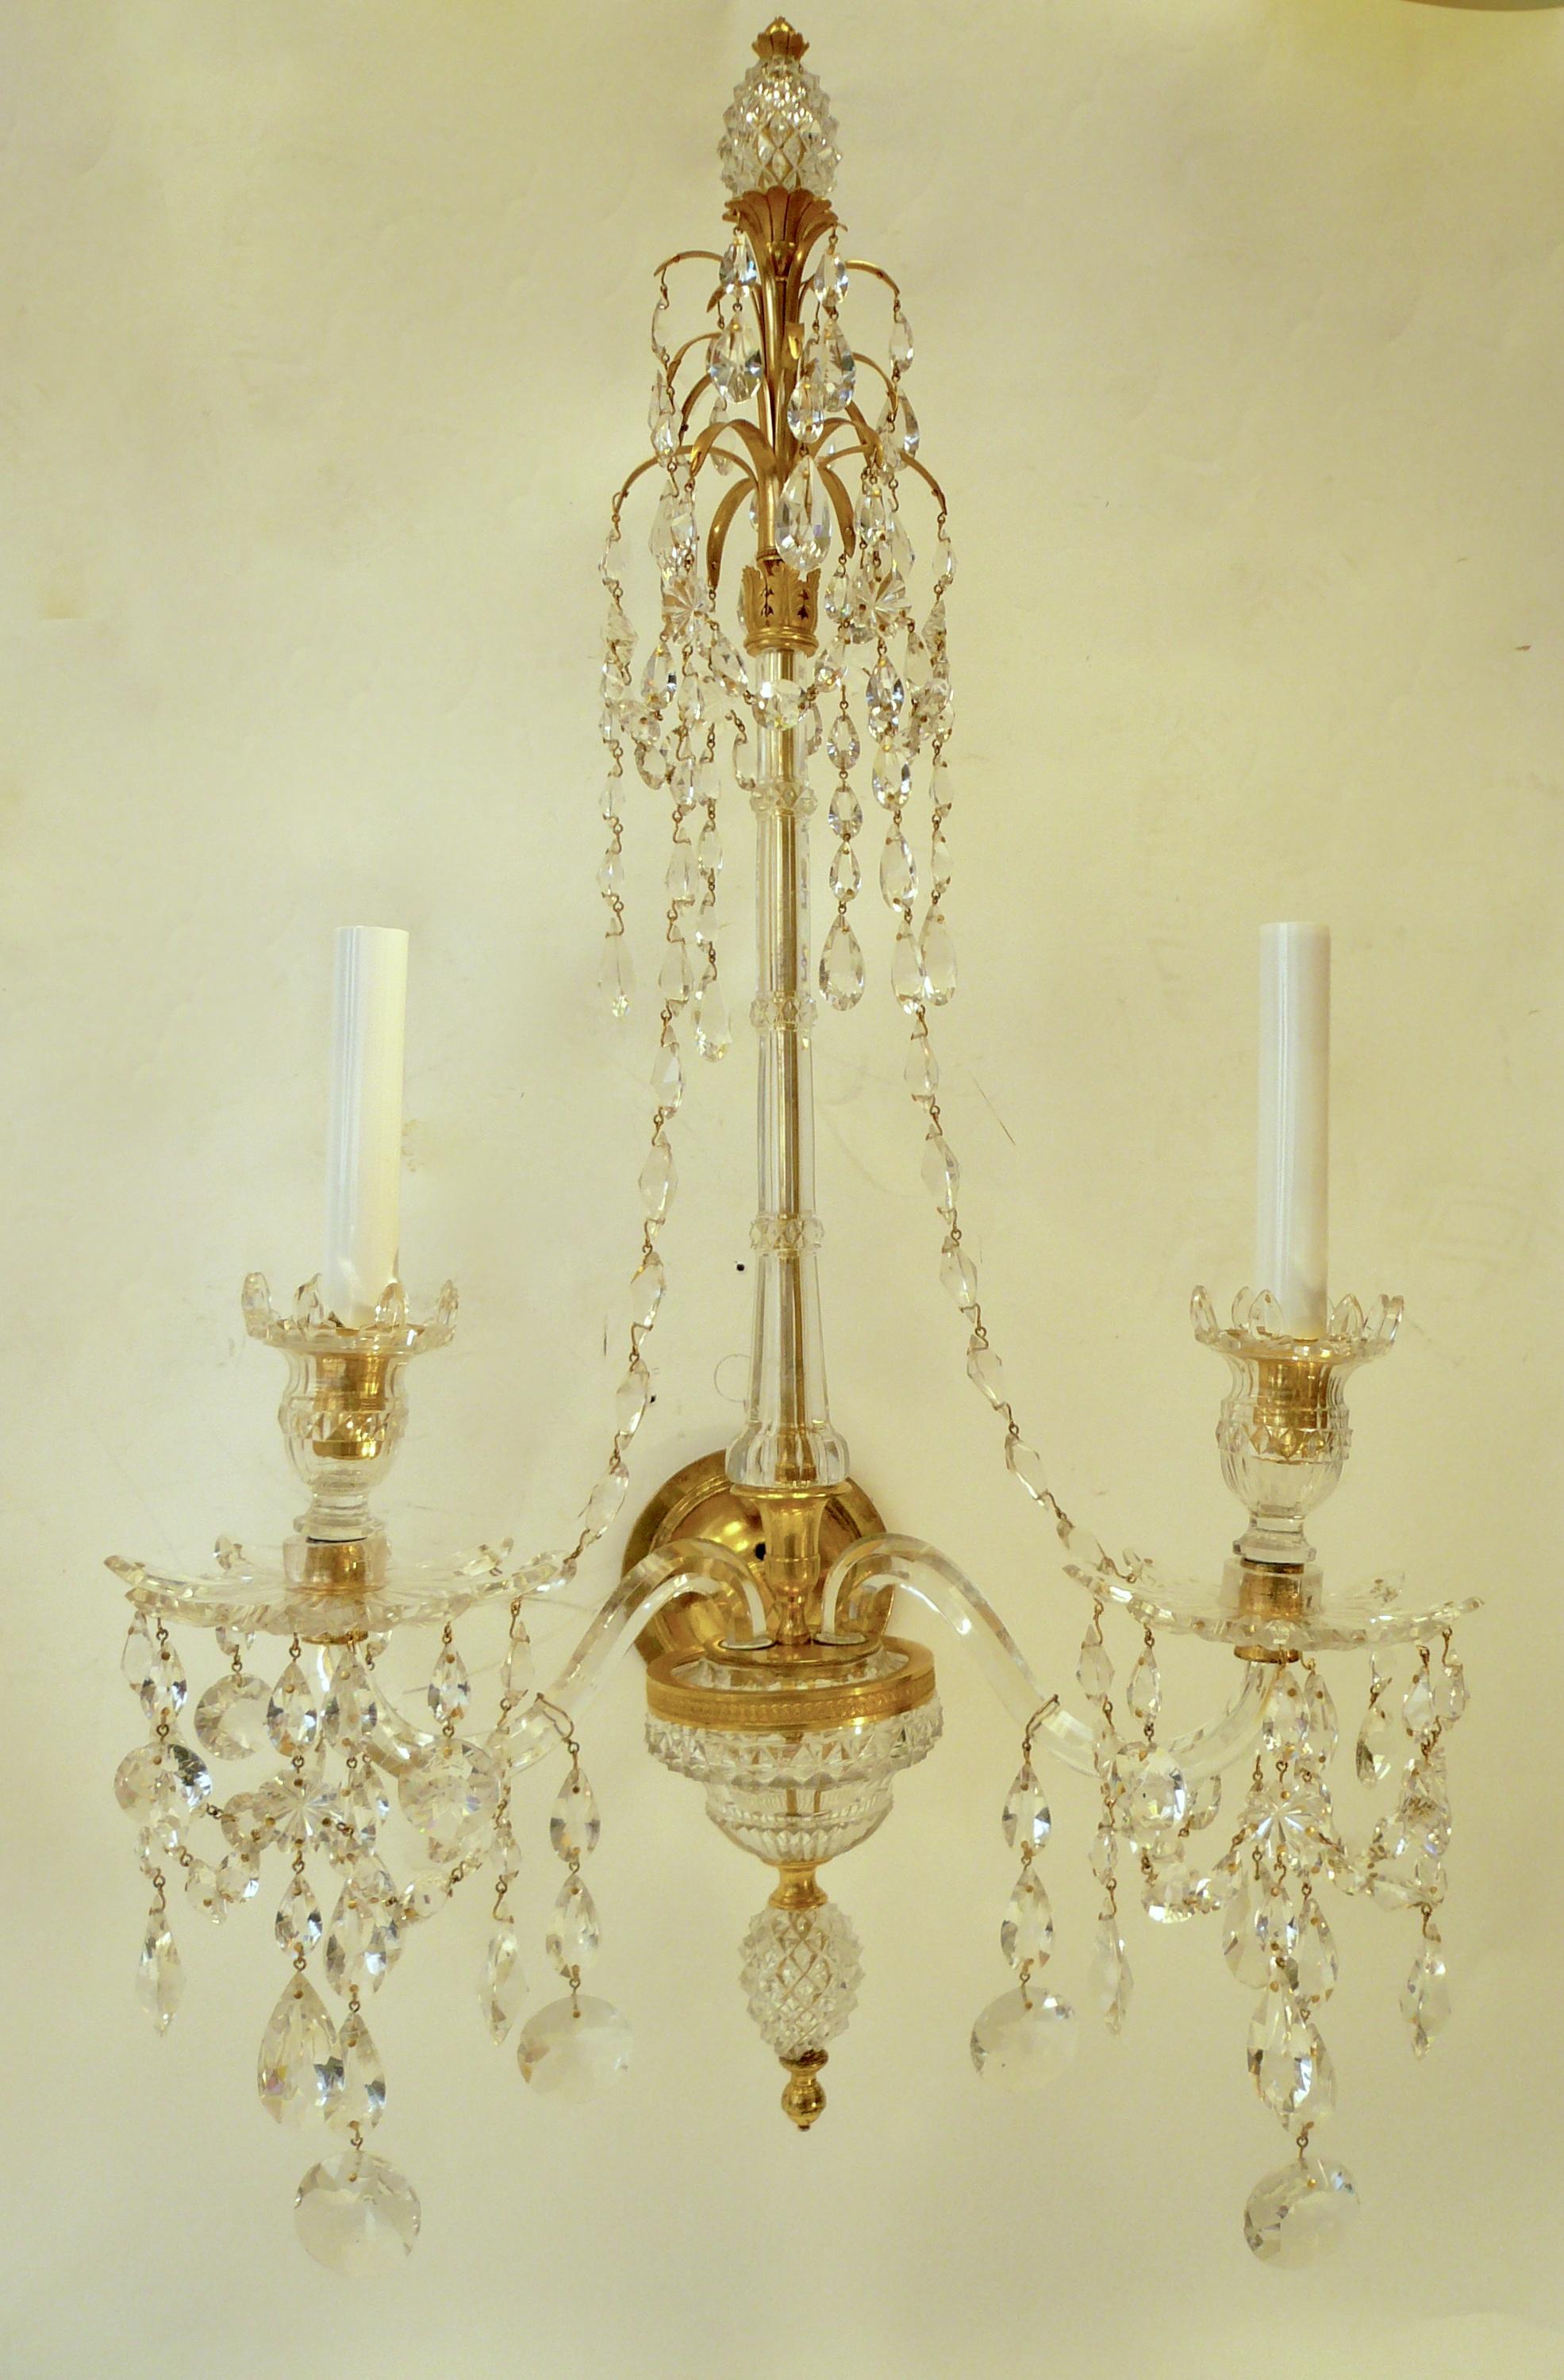 Exquisite Pair of Georgian Sconces in the Adam Style, Attributed to Wm. Parker For Sale 3